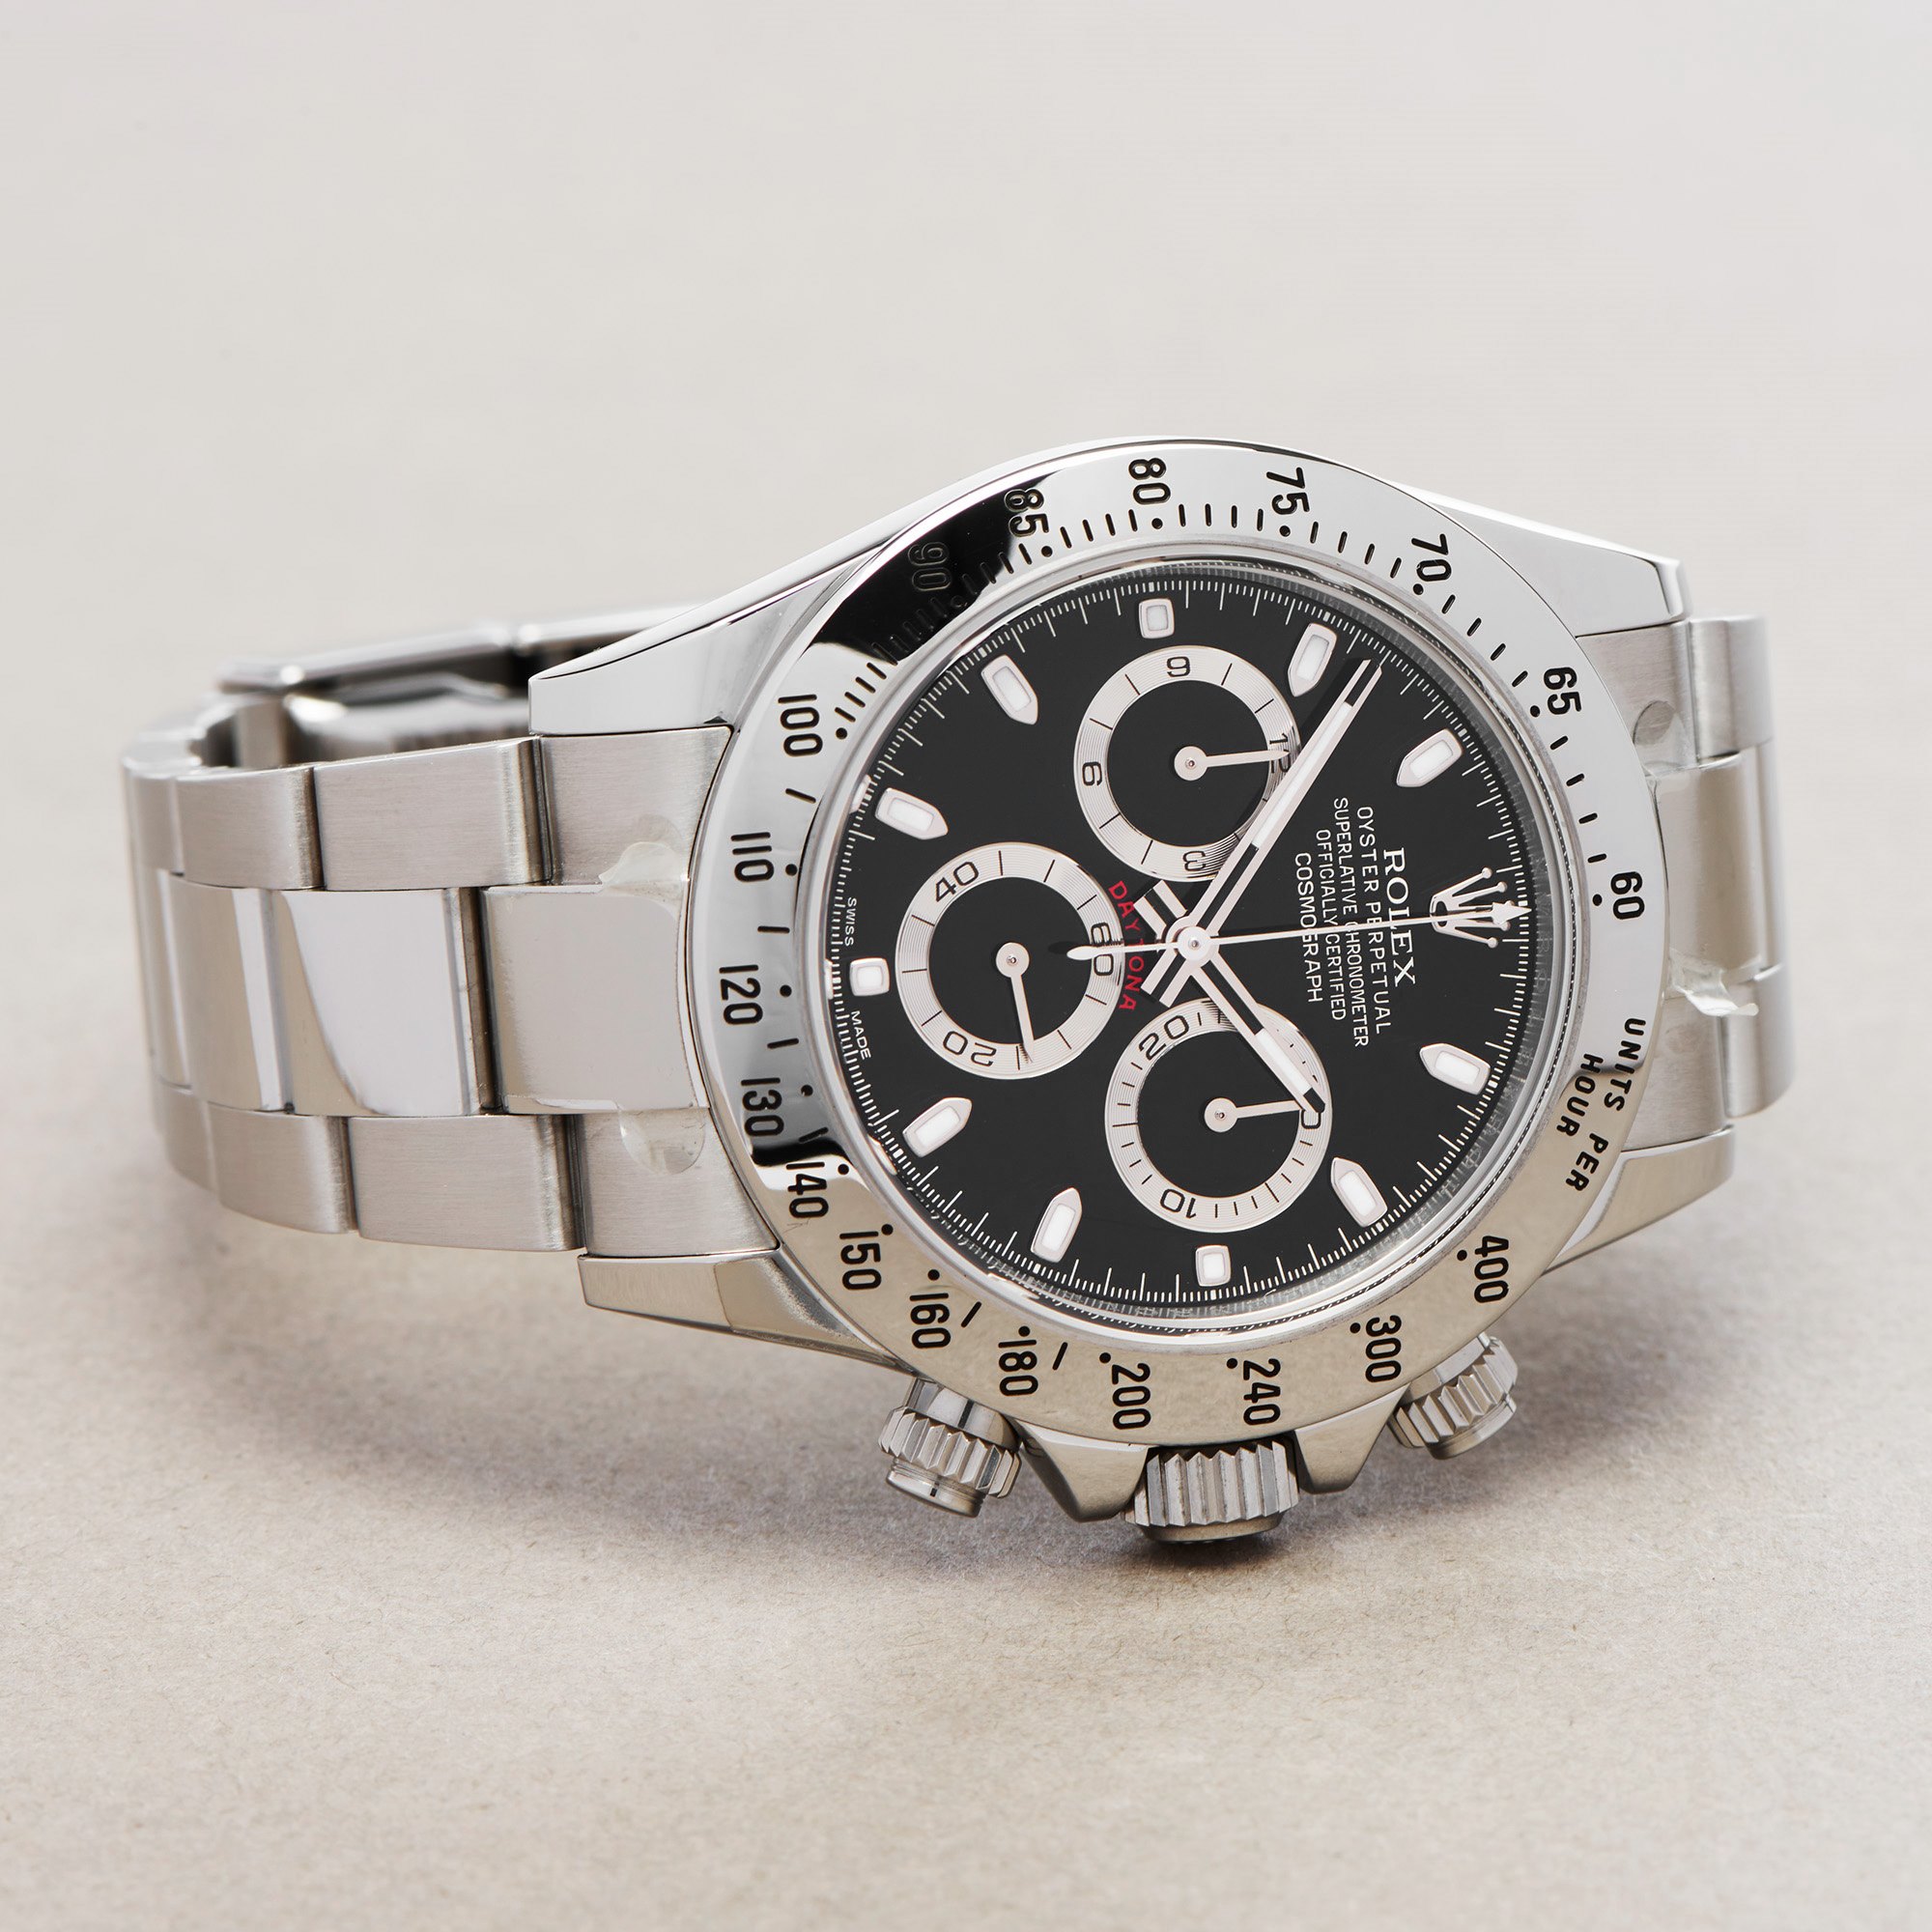 Rolex Daytona APH Dial Stainless Steel 116520